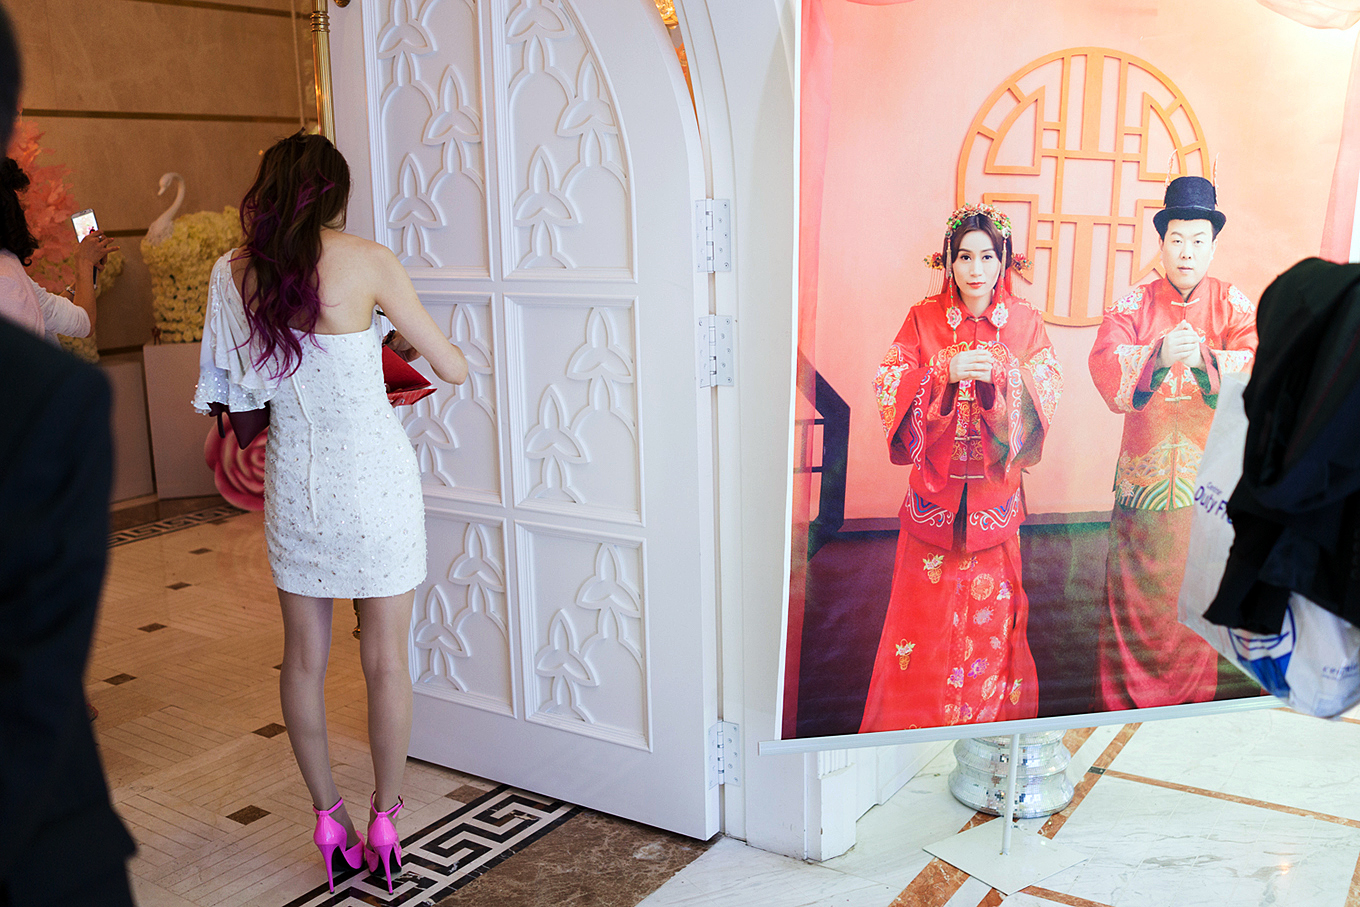 Inside Lavender Wedding, a wedding function warehouse in Shanghai, houses three chapels and five wedding banquet rooms with disco corridors and plenty of wedding backdrops for more photos. Pre-wedding photos are displayed at right.